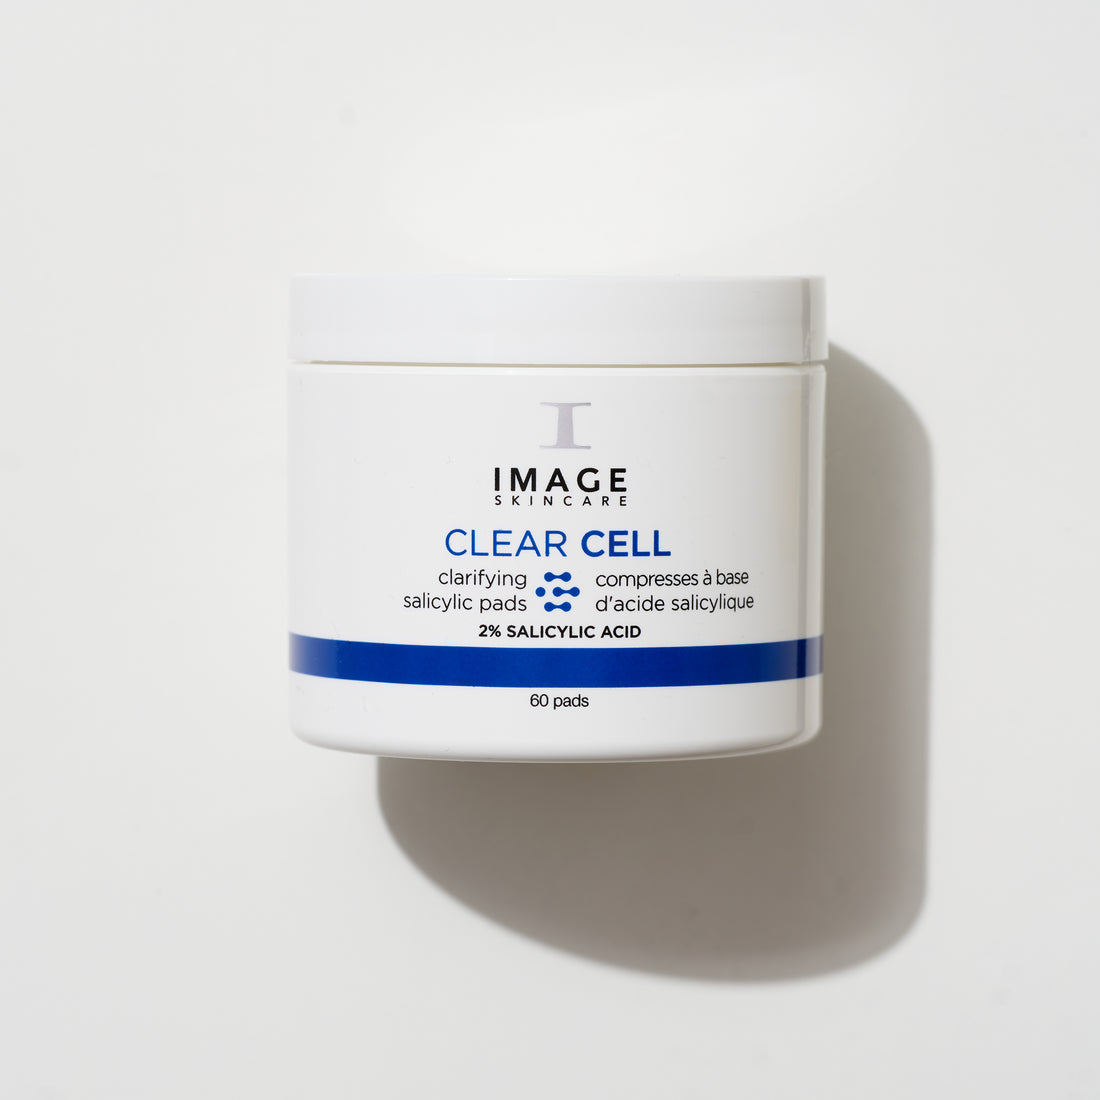  Clear Cell | Image Skincare